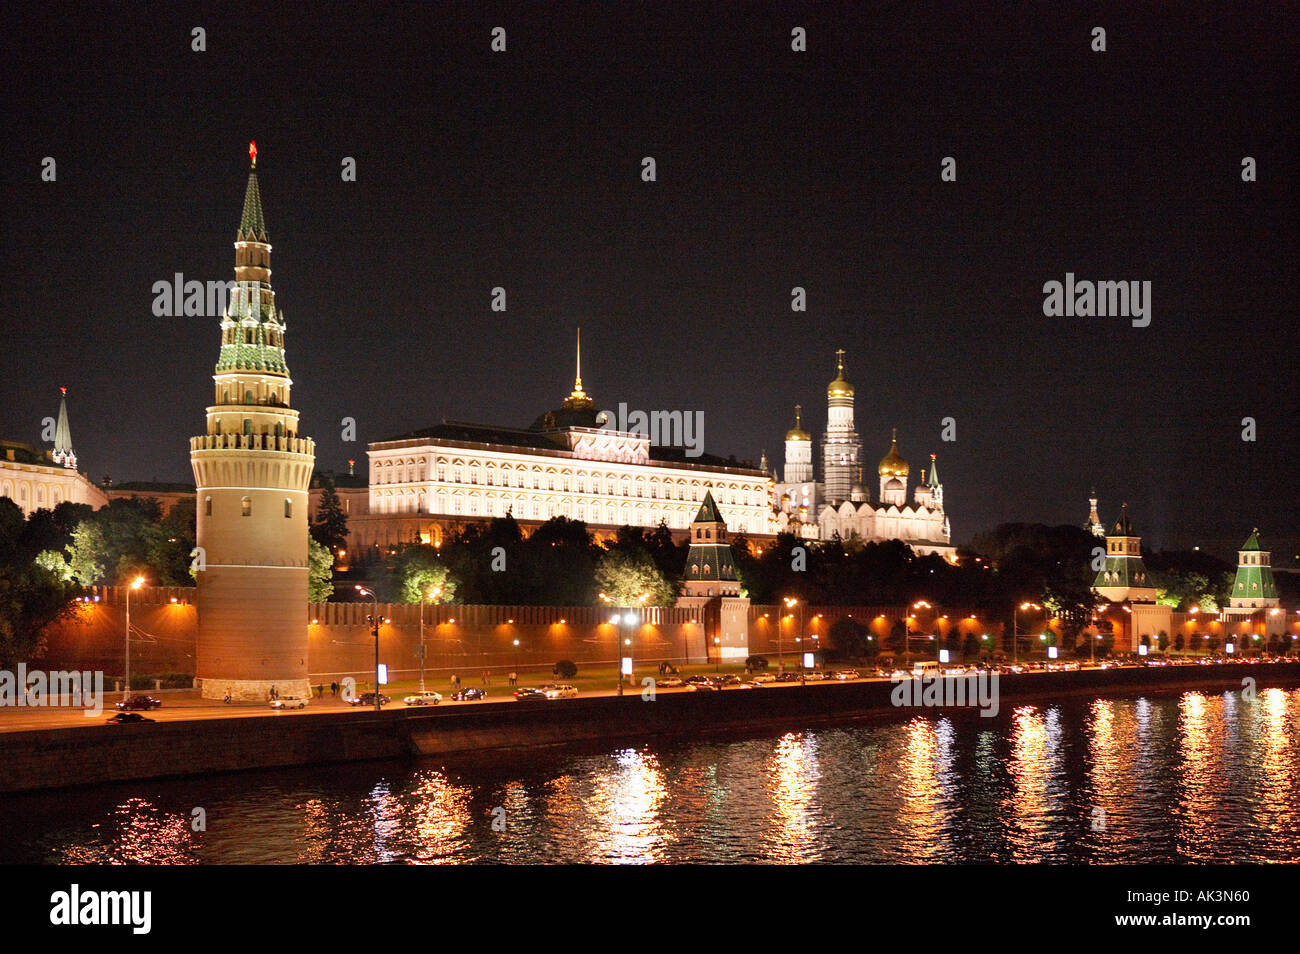 THE KREMLIN AND MOSCOW RIVER AT NIGHT FROM KAMENNY BRIDGE Stock Photo